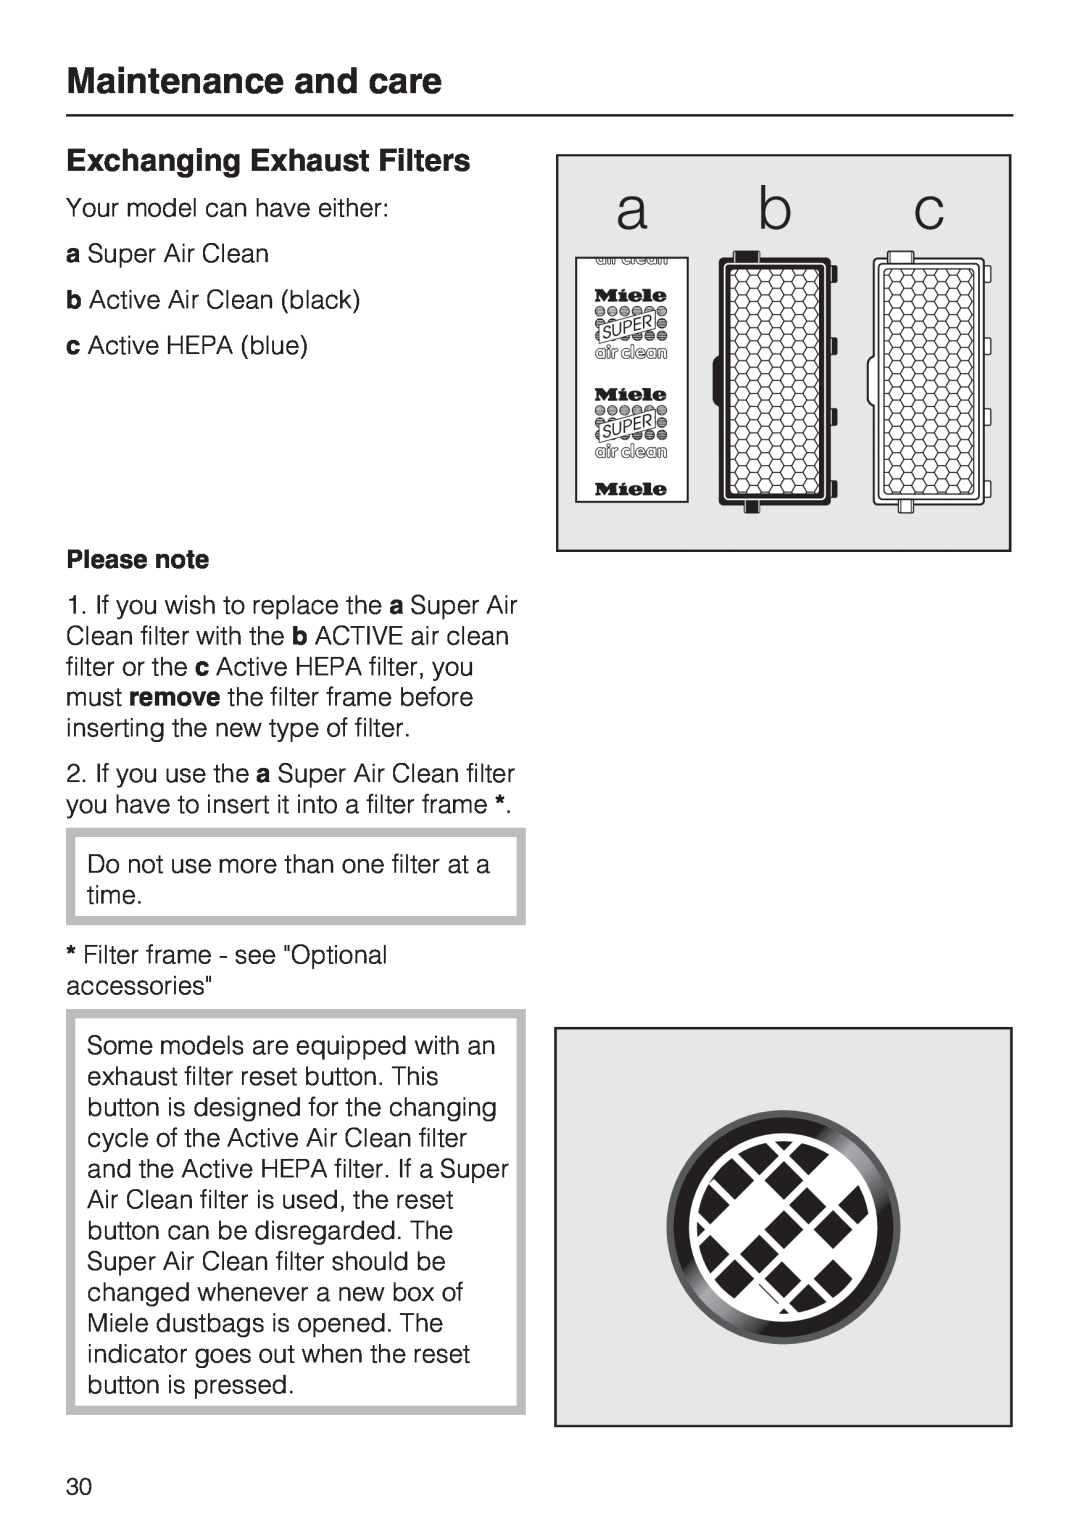 NEC S 5000 operating instructions Exchanging Exhaust Filters, Maintenance and care, Please note 